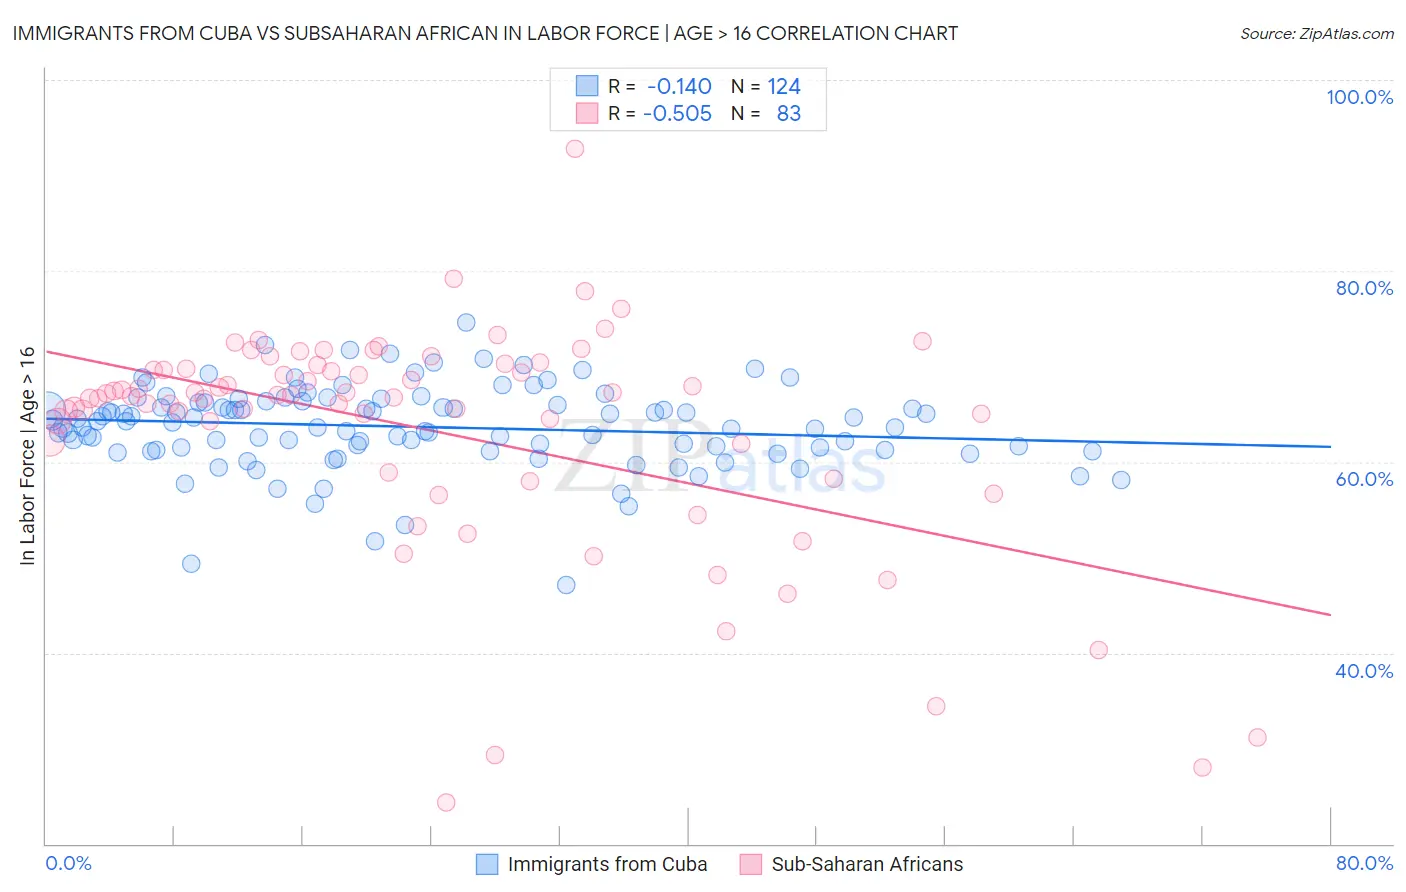 Immigrants from Cuba vs Subsaharan African In Labor Force | Age > 16